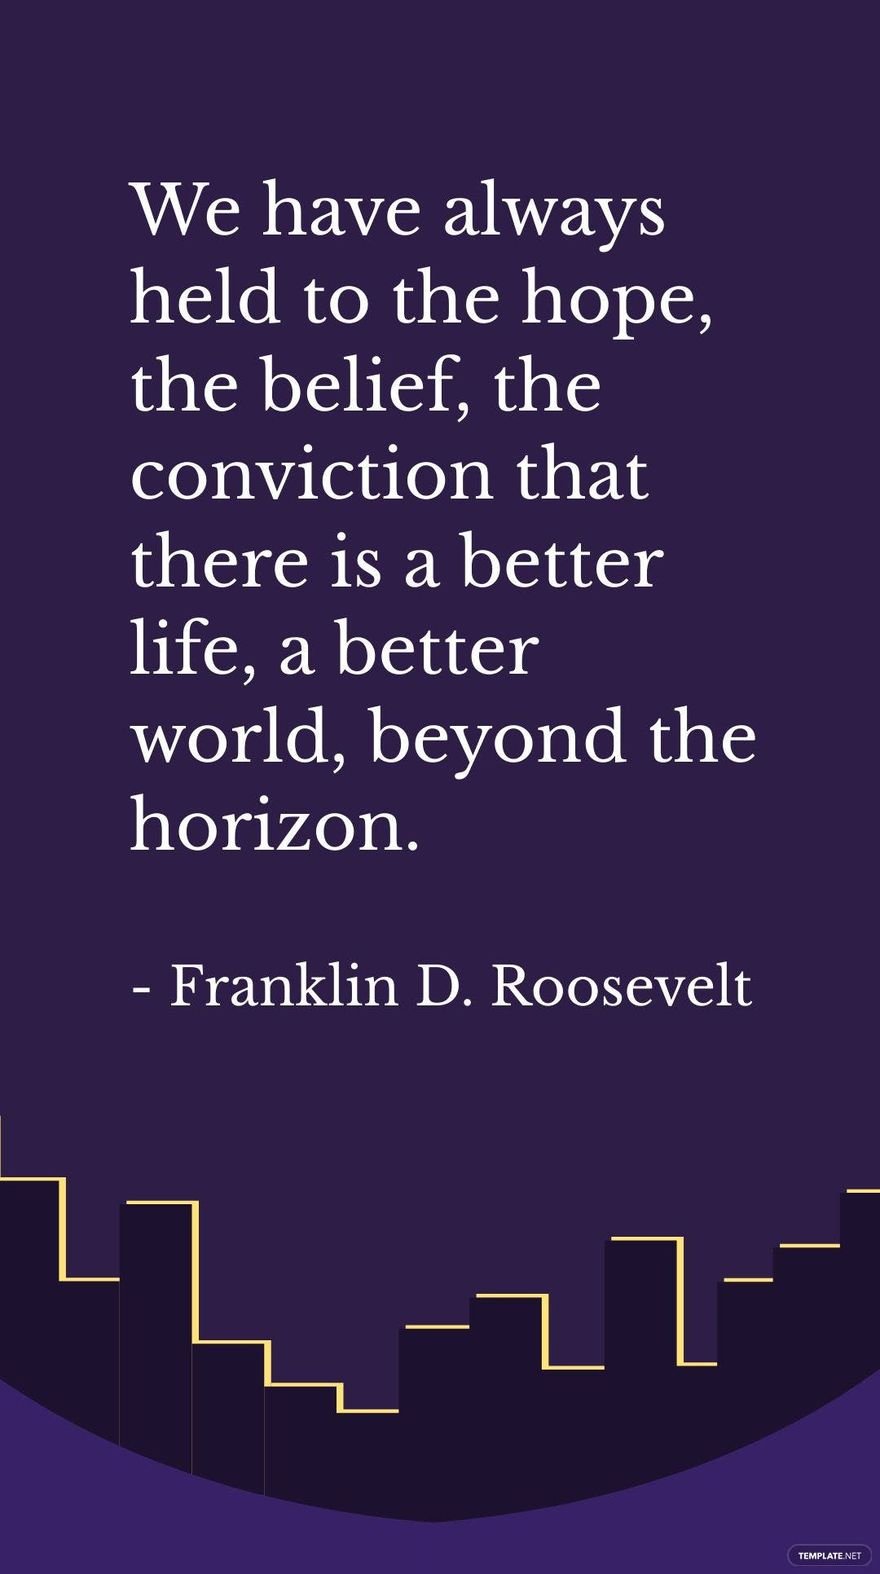 Free Franklin D. Roosevelt - We have always held to the hope, the belief, the conviction that there is a better life, a better world, beyond the horizon.